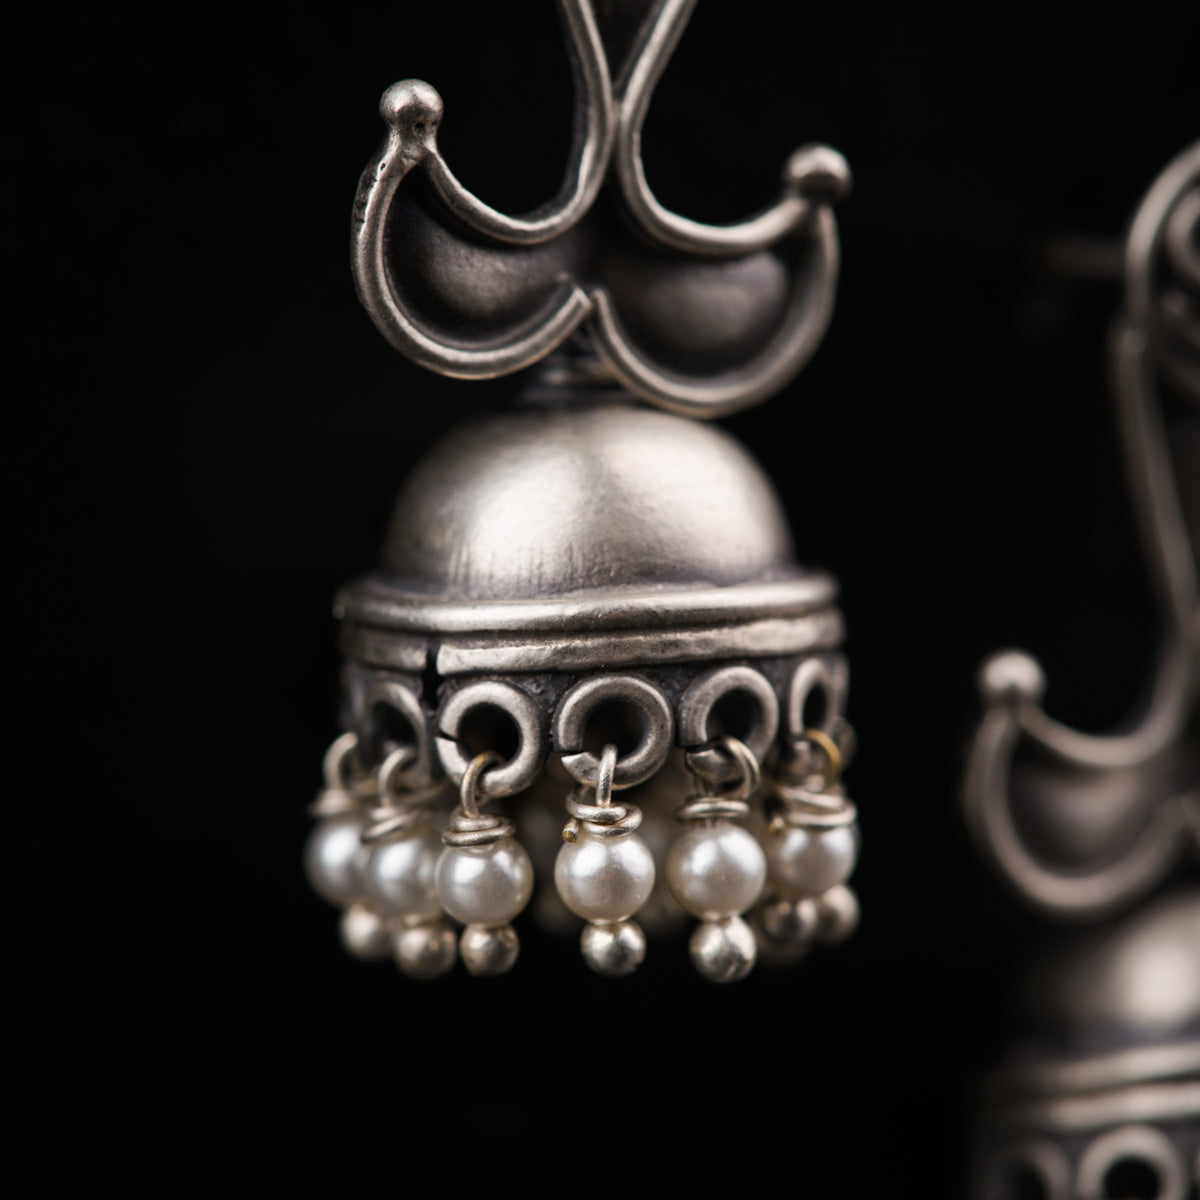 a close up of a metal bell with pearls on it